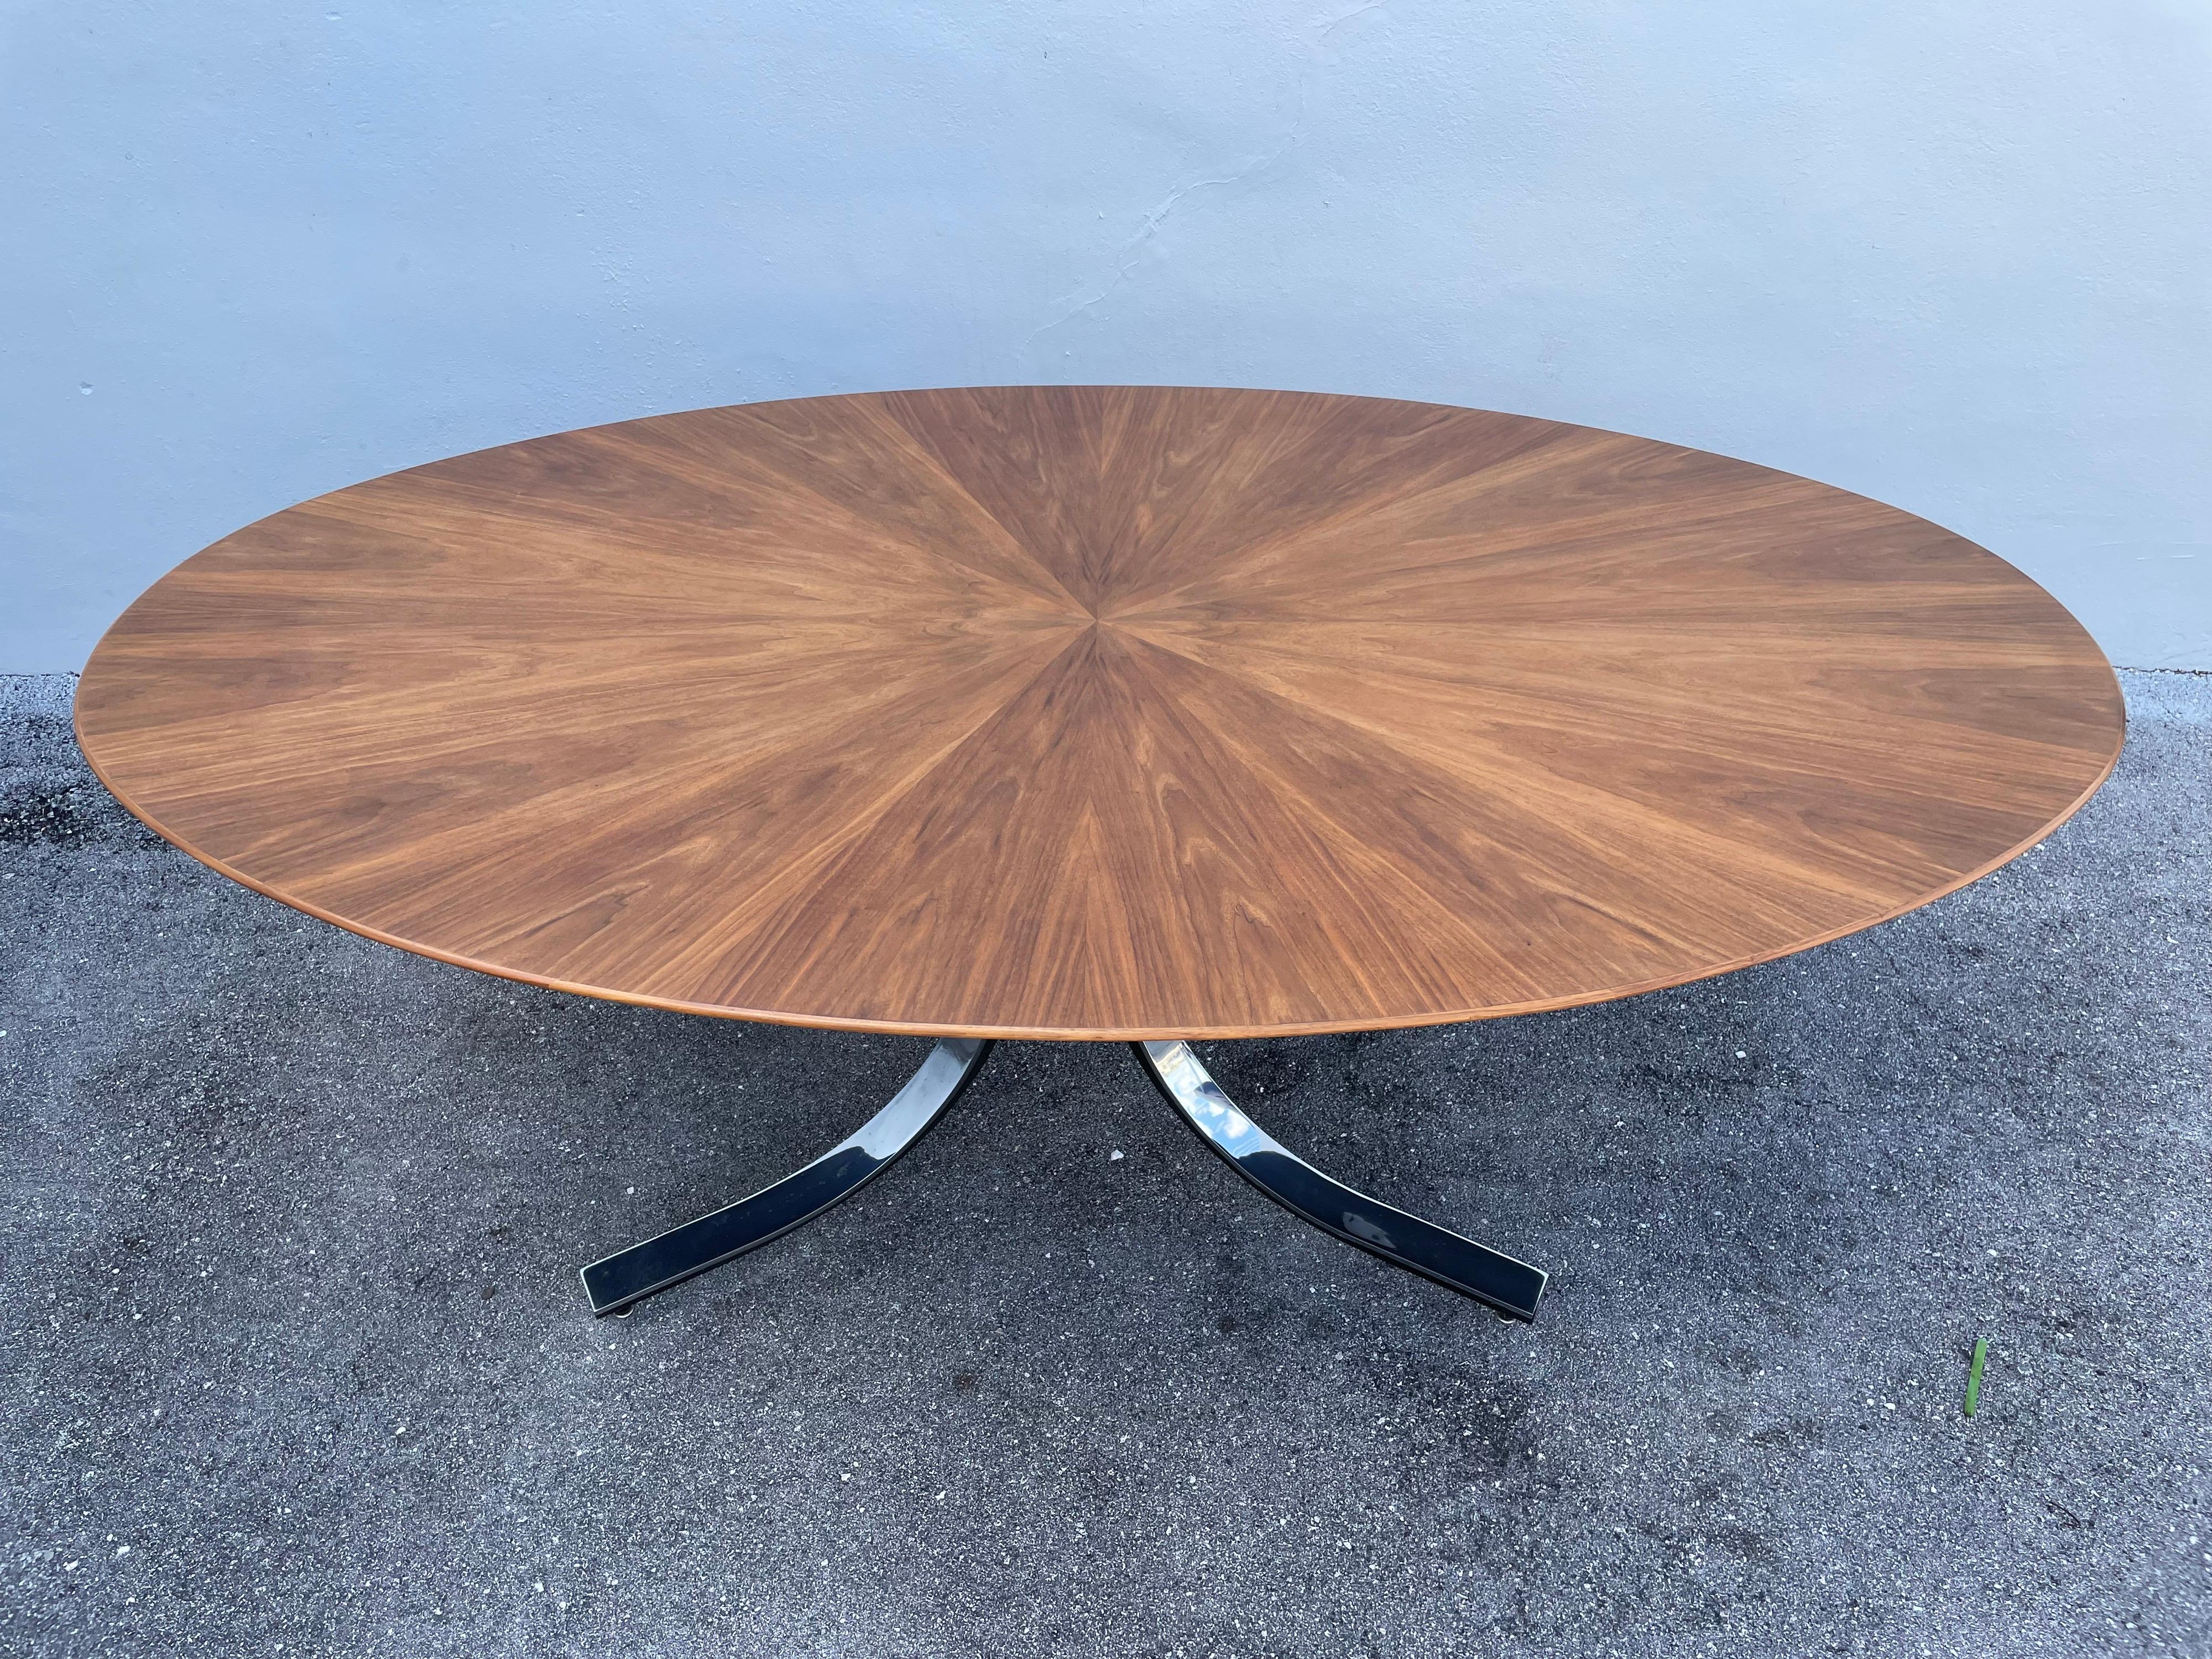 Mid-Century Modern walnut elliptical starburst design dining table by Stow & Davis furniture company - often attributed to Osvaldo Borsani (we suspect it is). Featuring a rich walnut starburst table top and stainless steel splayed arching legs. An